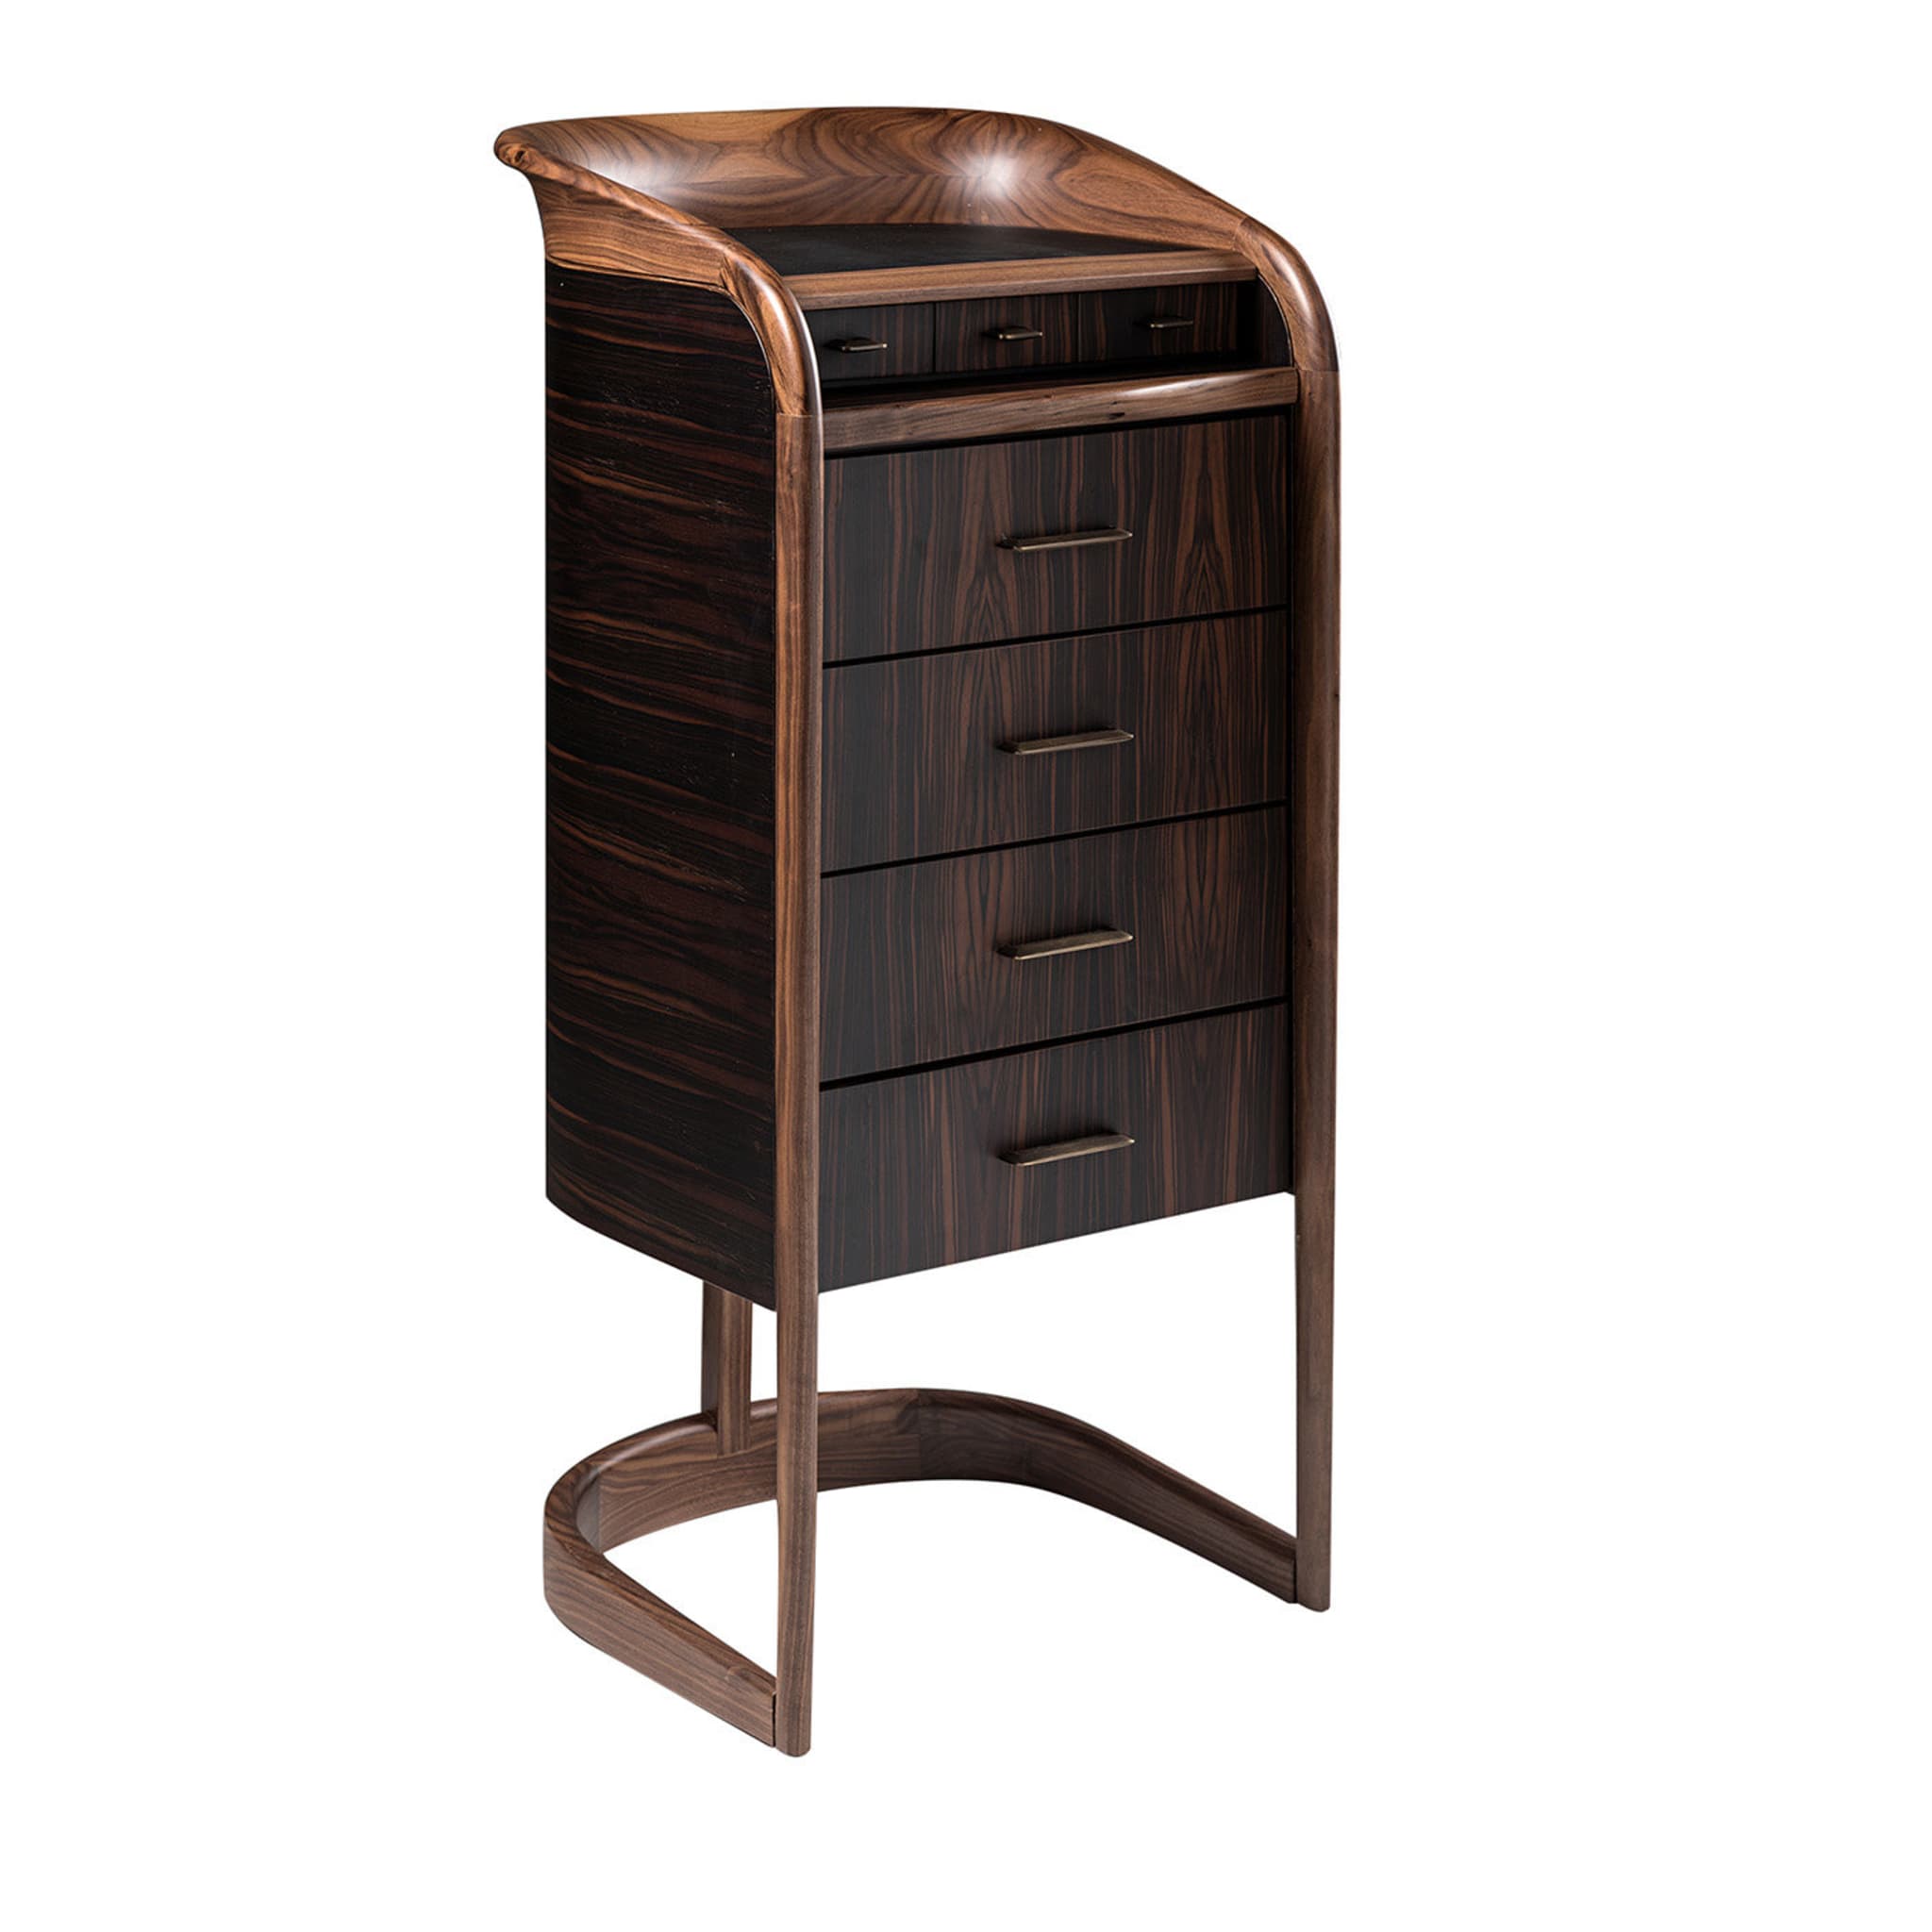 Pitagora Chest Of Drawers by Ivano Colombo - Main view